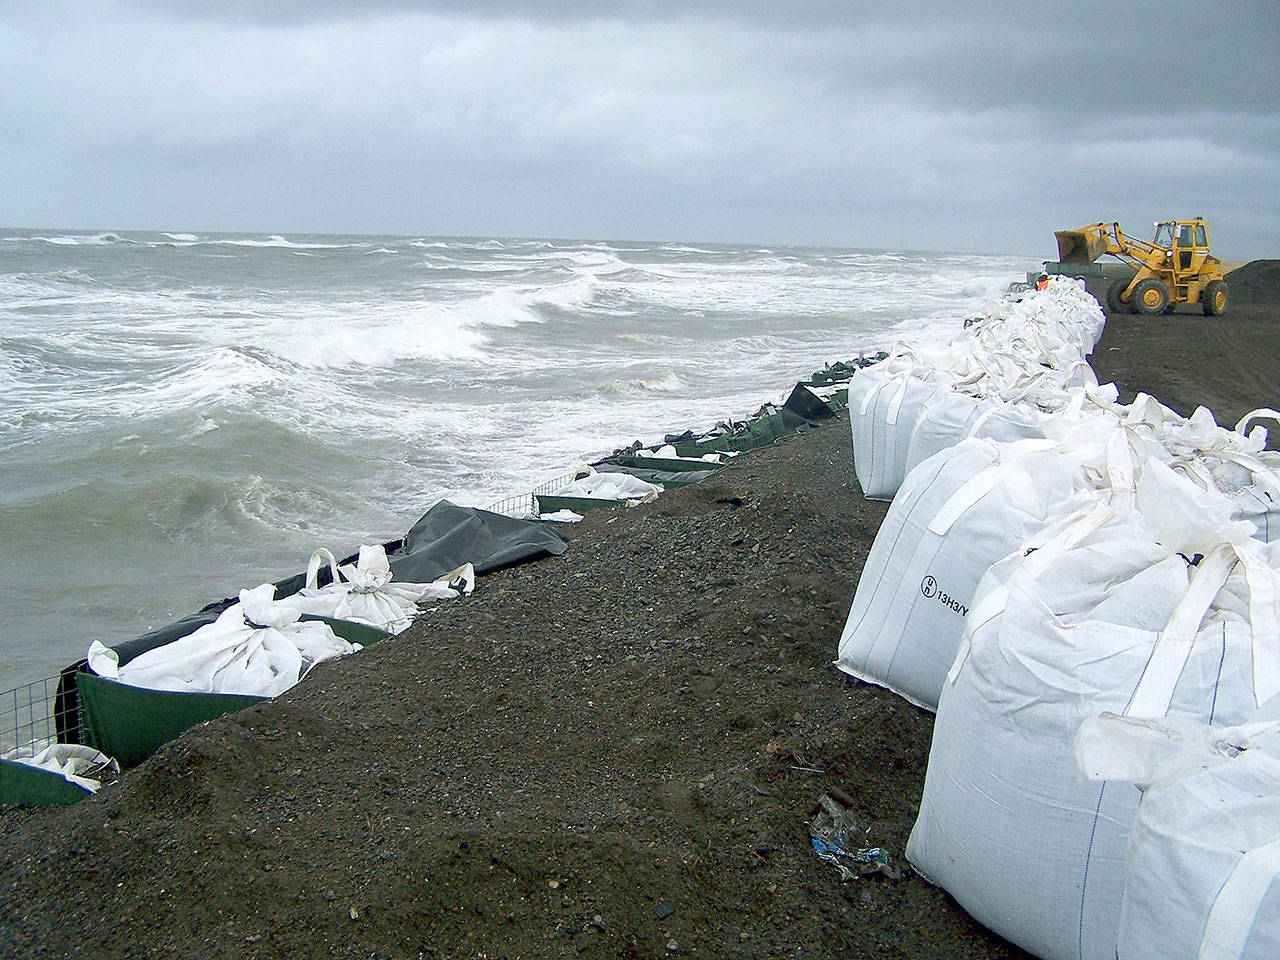 Sandbags are stacked along the seawall in Kivalina, Alaska, in September 2017. Northern Alaska coastal communities and climate scientists say sea ice disappeared far earlier than normal this spring and it’s affecting wildlife. The Anchorage Daily News reported that ice melted because of exceptionally warm ocean temperatures. (AP Photo/Mary Sage, File)